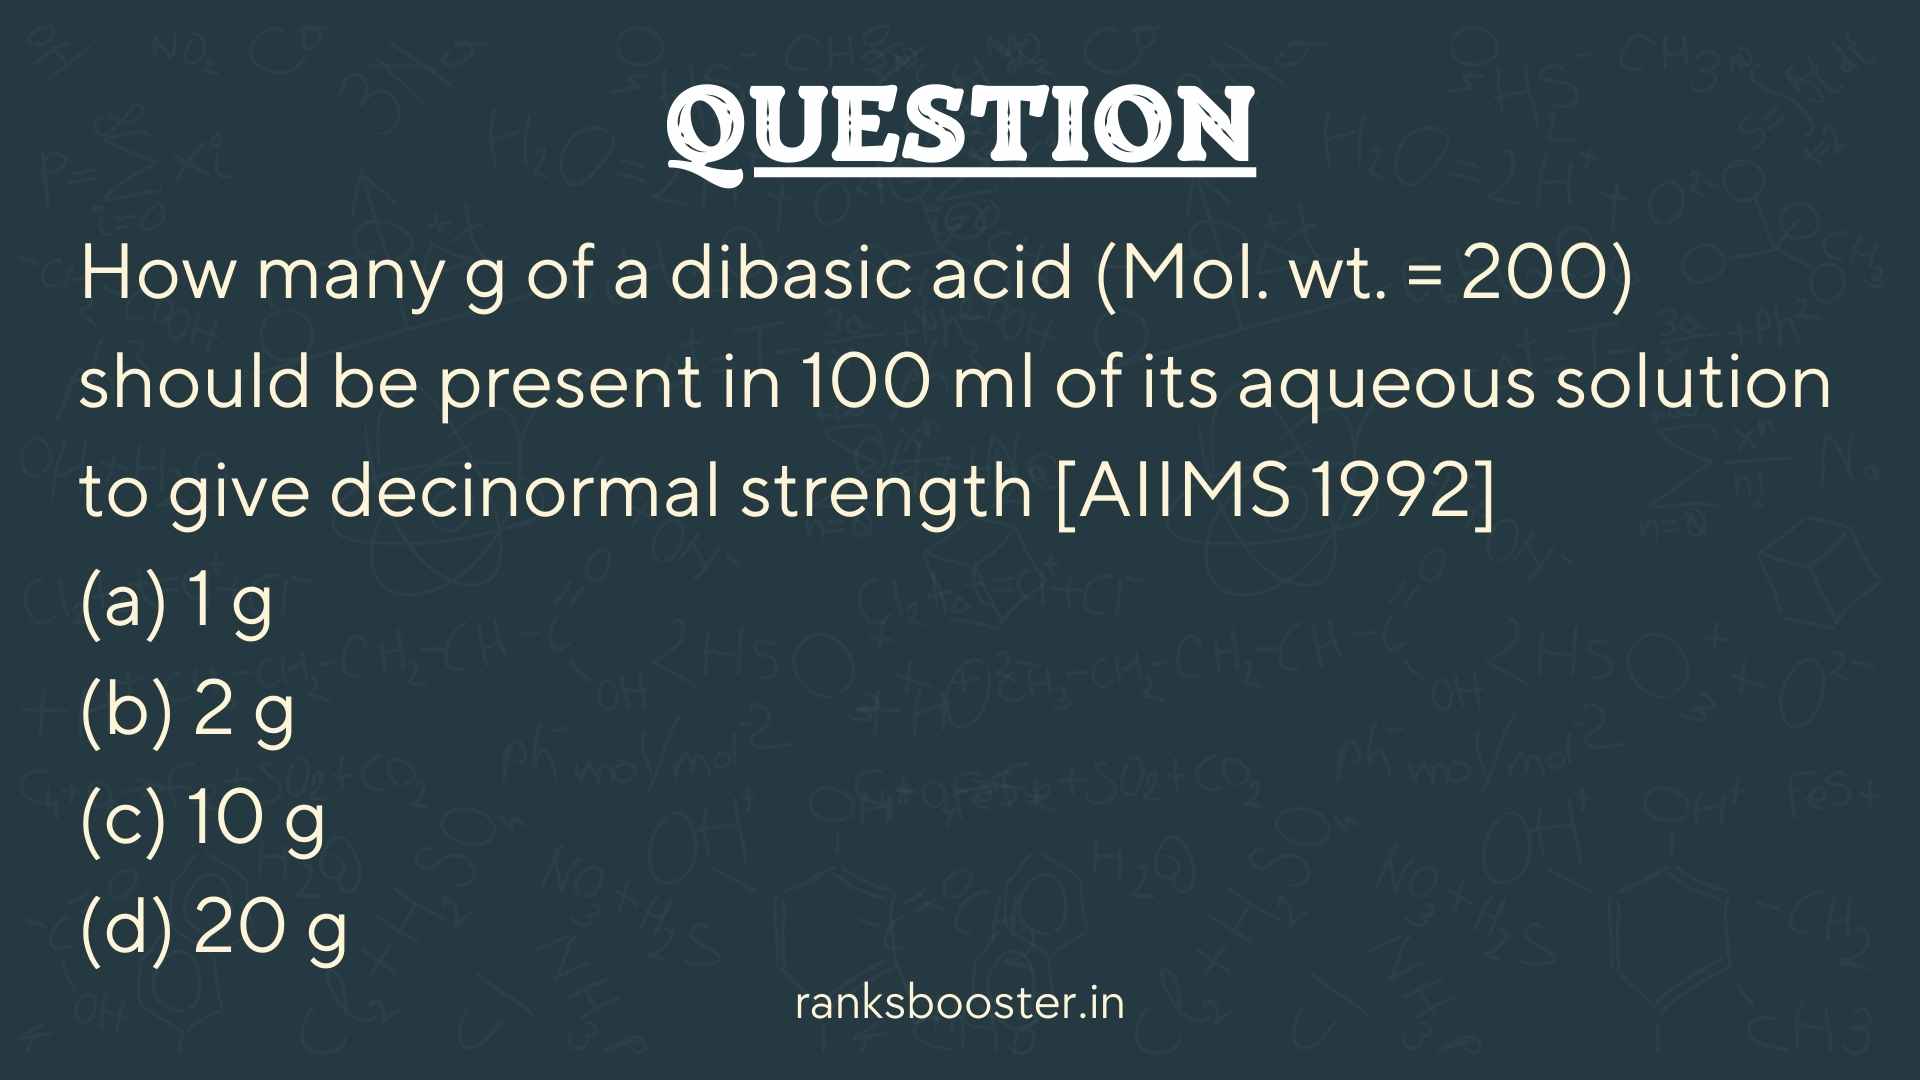 Question: How many g of a dibasic acid (Mol. wt. = 200) should be present in 100 ml of its aqueous solution to give decinormal strength [AIIMS 1992] (a) 1 g (b) 2 g (c) 10 g (d) 20 g